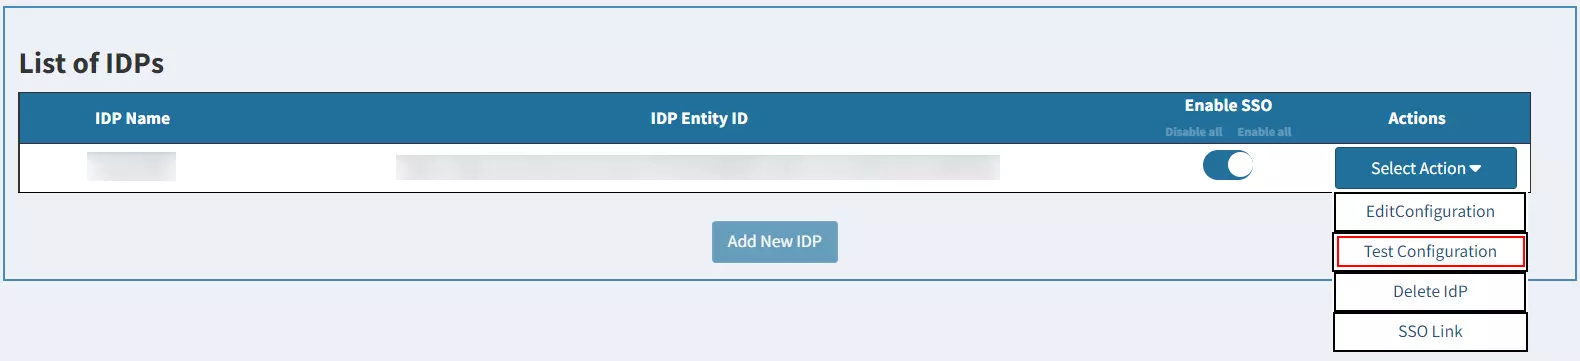 nopCommerce Single Sign-On (SSO) using Salesforce Community as IDP - Click on Test Configuration